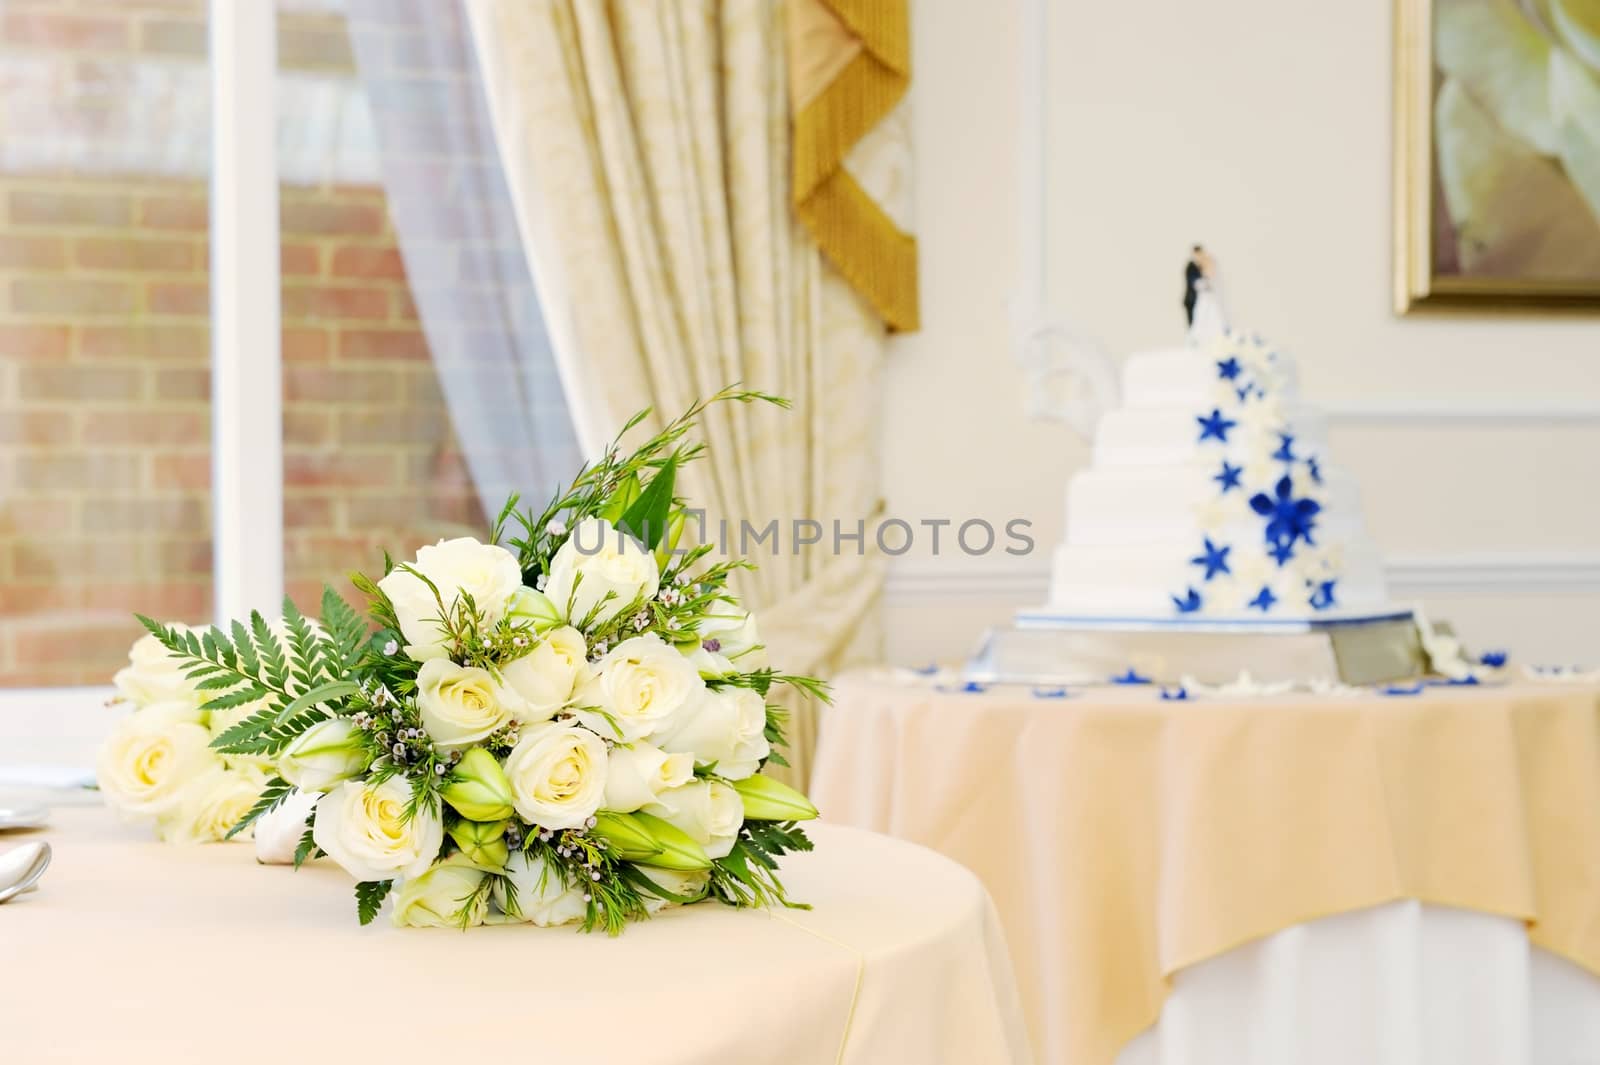 Wedding flowers and cake by kmwphotography